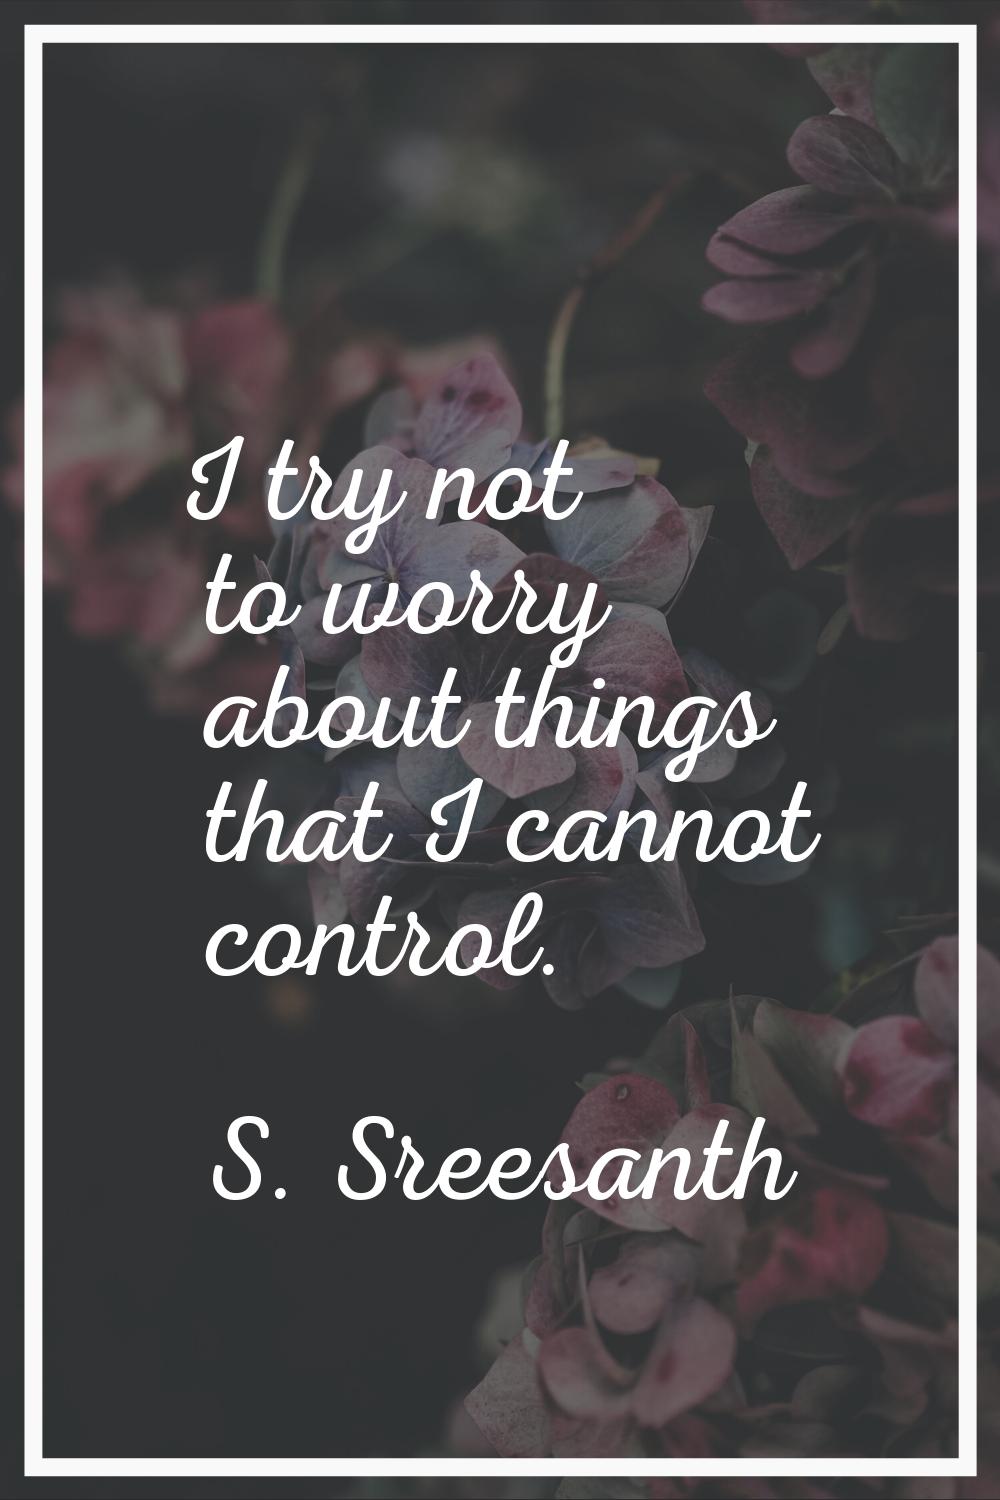 I try not to worry about things that I cannot control.